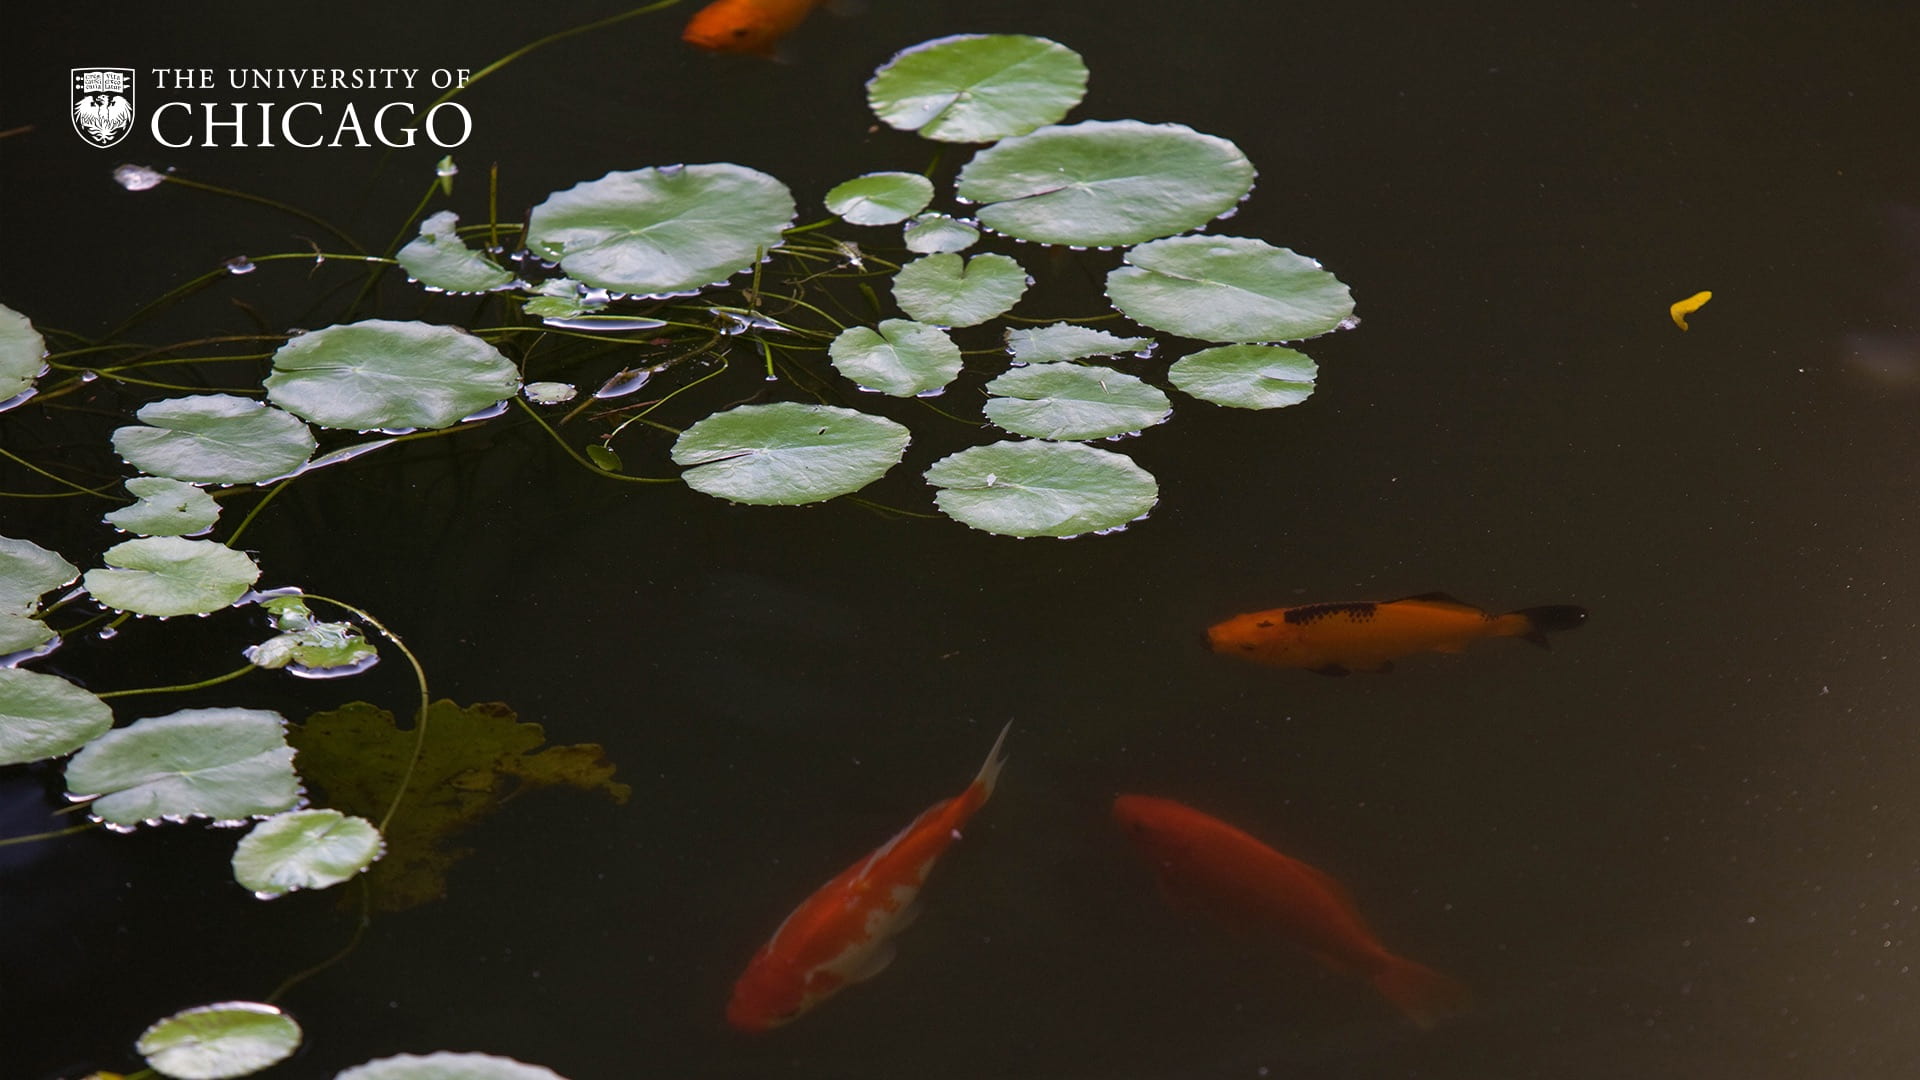 Four orange koi fish beneath the water surface with a few green lily pads